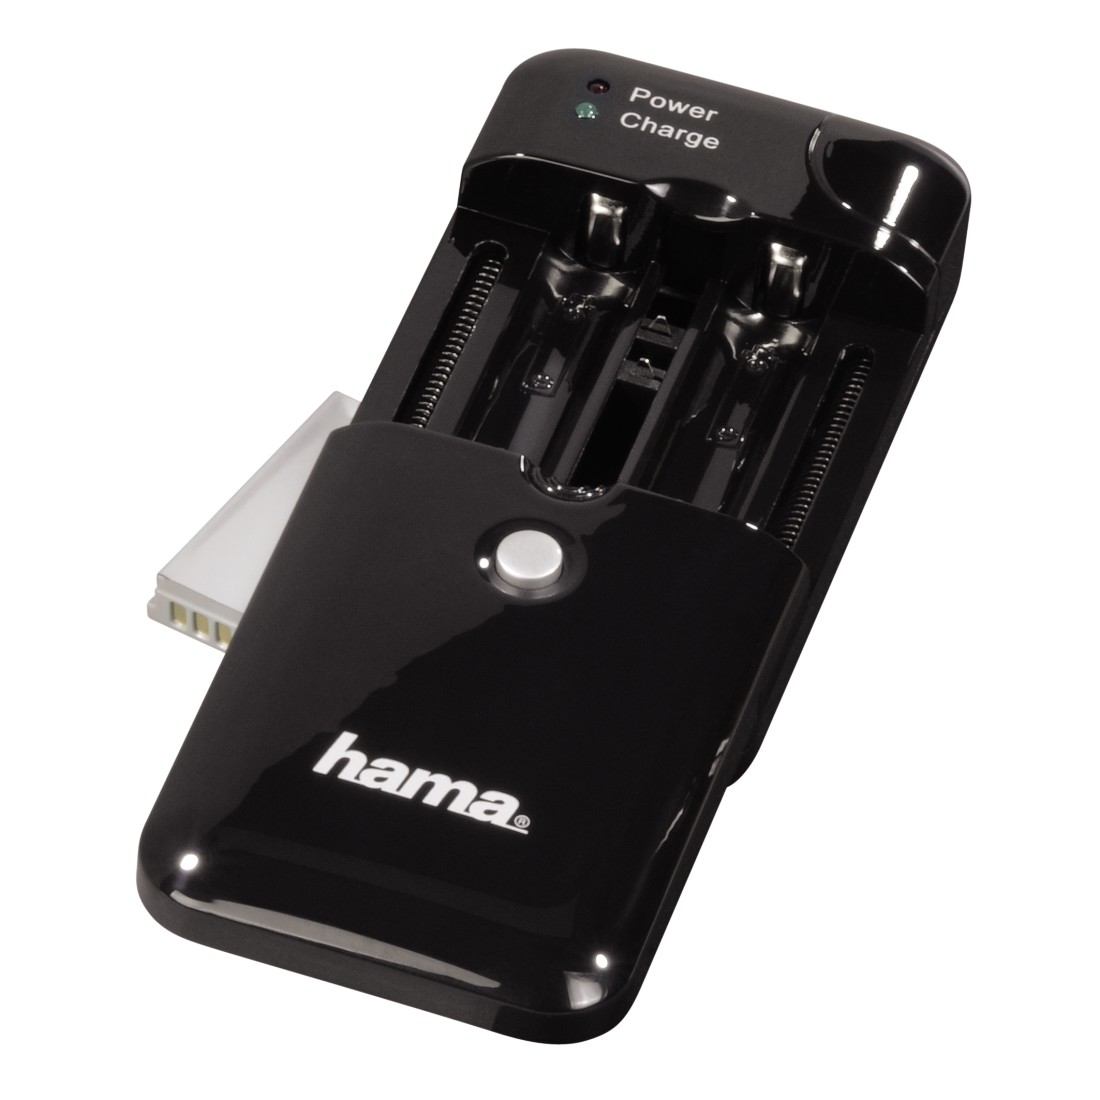 00081360 Hama "Delta Multi" Universal Charger for Lithium Ion Batteries and  AA/AAA Cells | hama.com